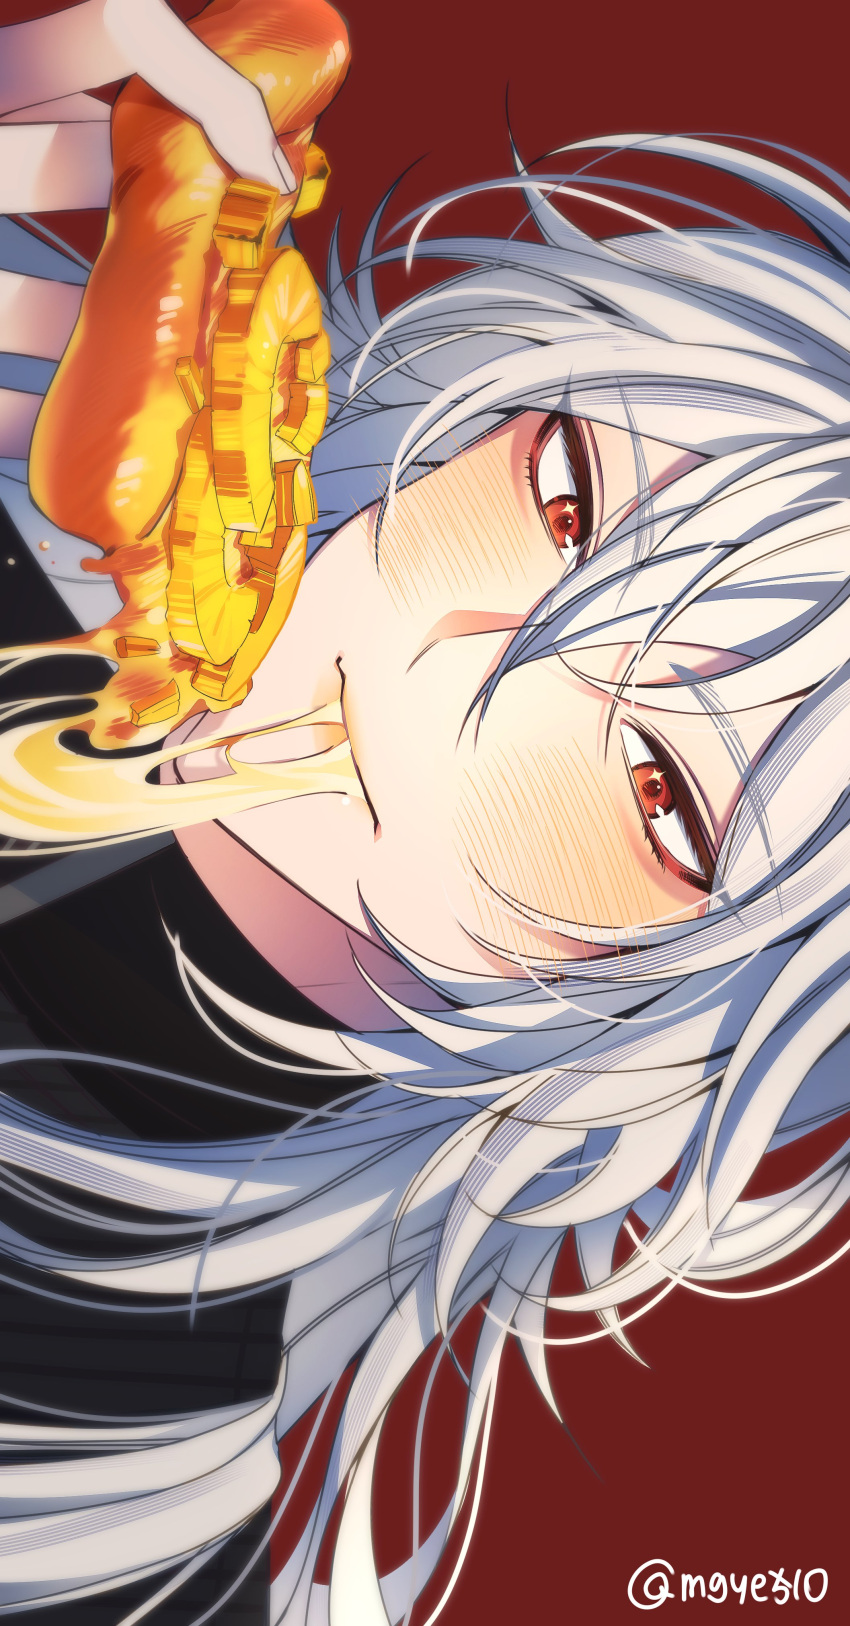 1boy a_date_with_death absurdres bishounen casper_(a_date_with_death) eating food gloves highres holding holding_food holding_pizza long_hair male_focus mgye510 pizza pizza_slice red_background red_eyes simple_background solo upper_body